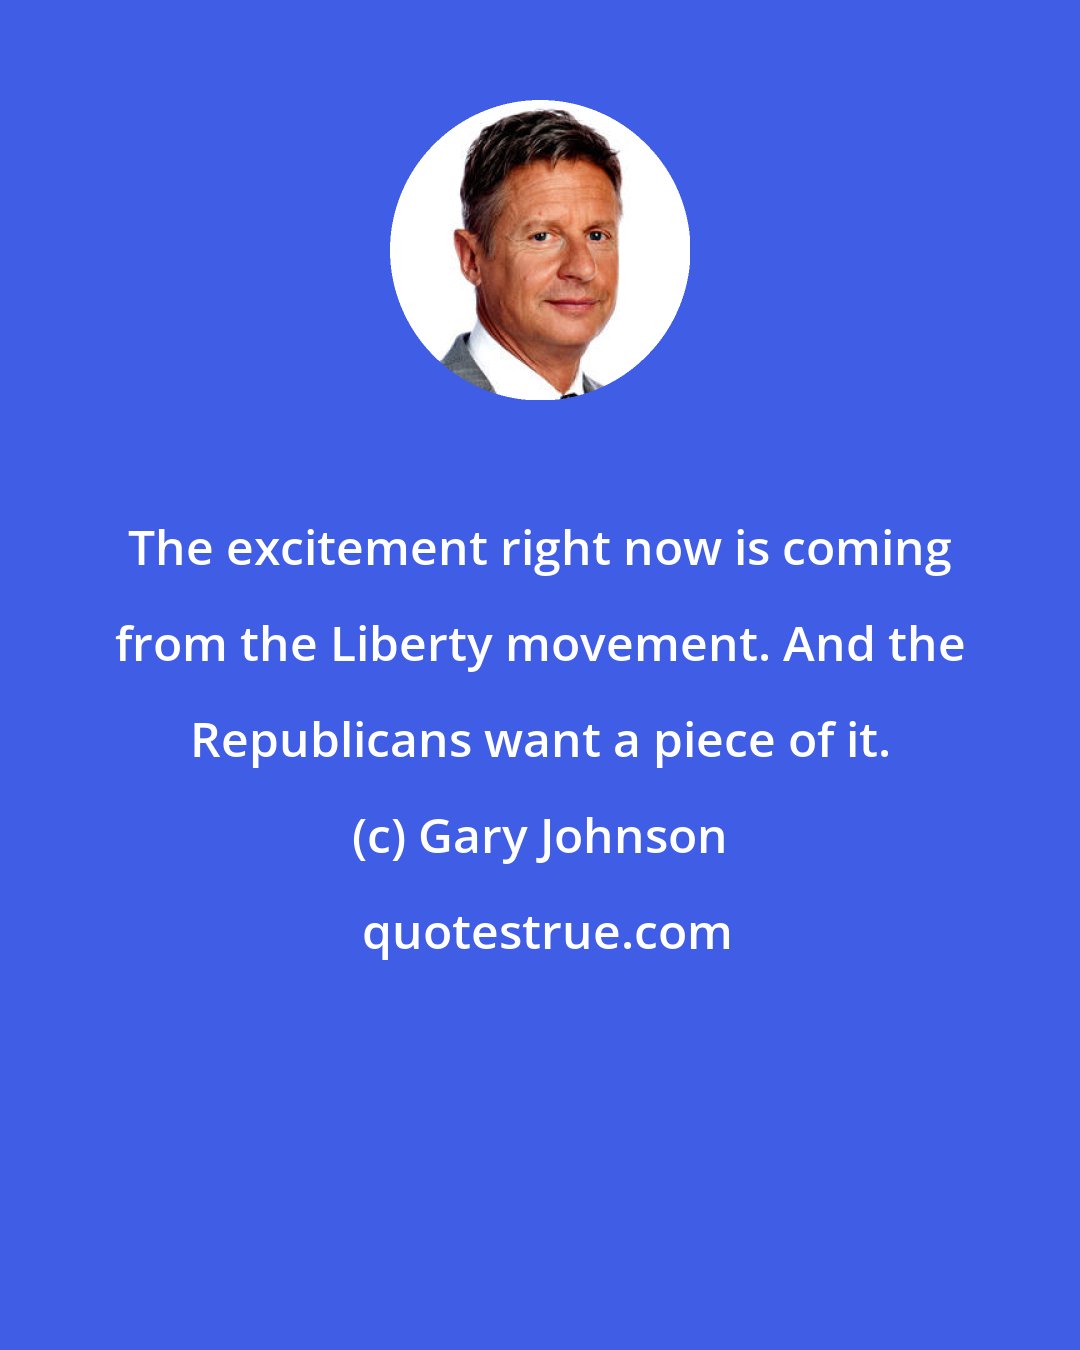 Gary Johnson: The excitement right now is coming from the Liberty movement. And the Republicans want a piece of it.